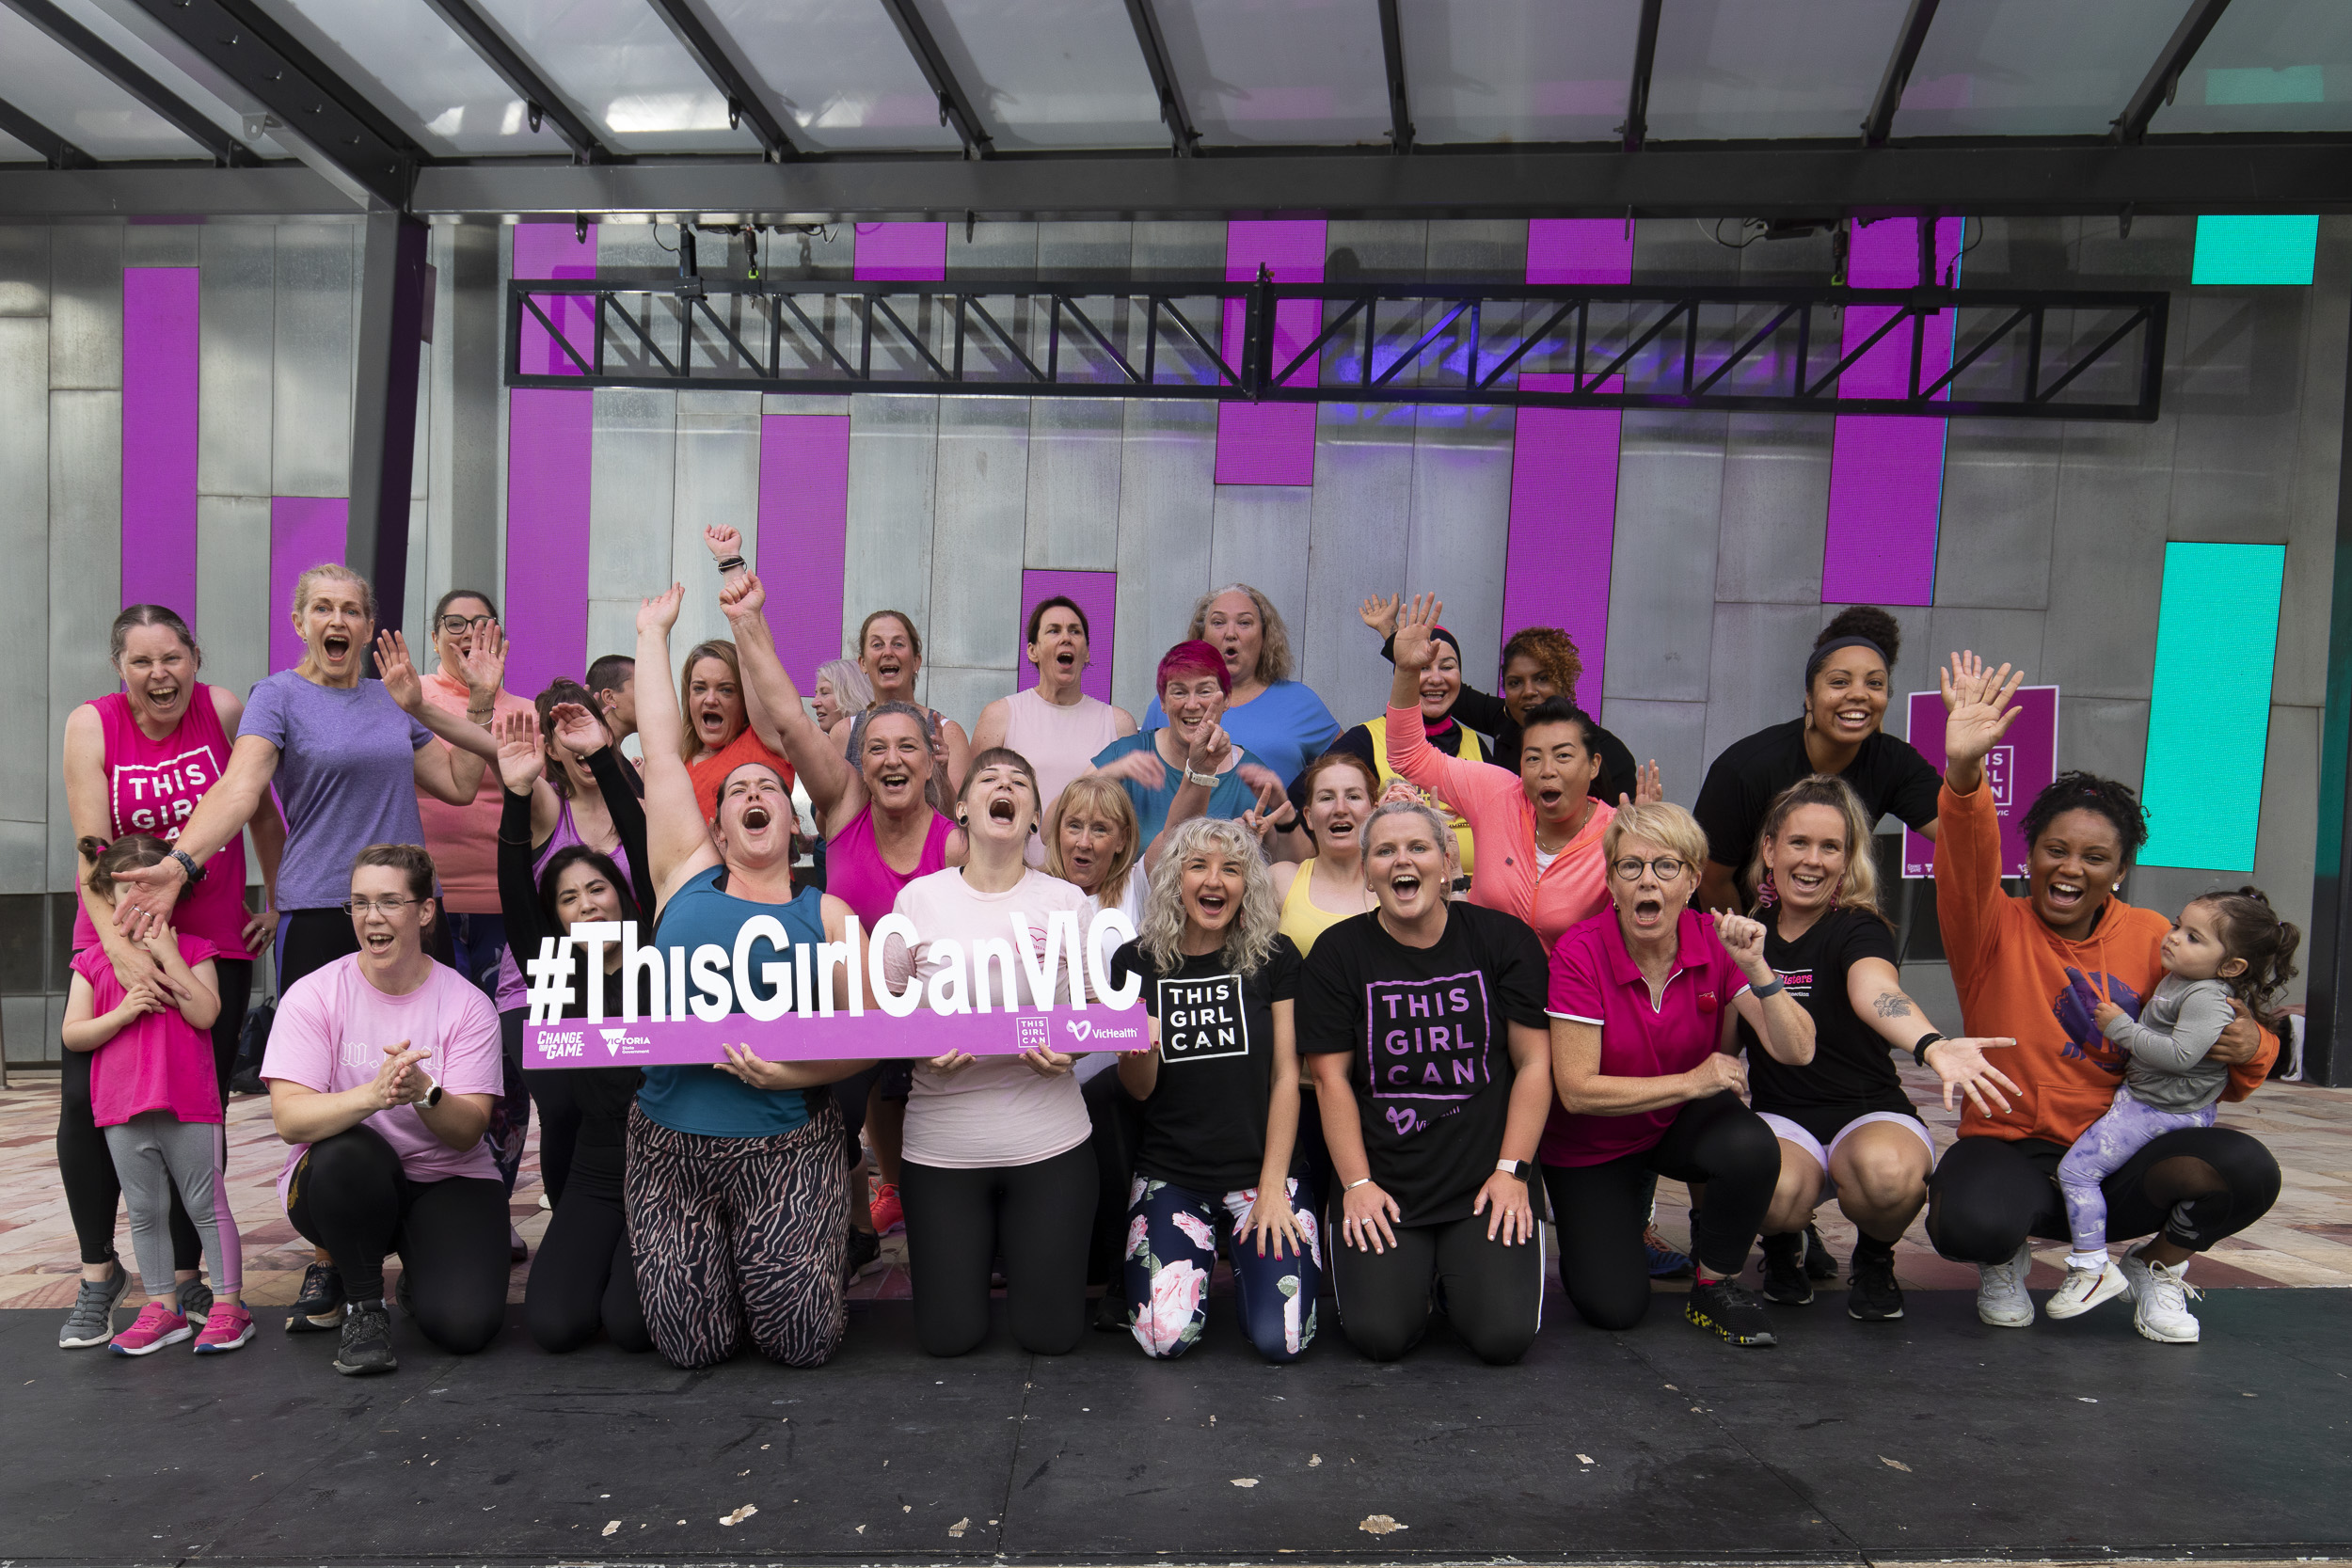 Women in sports gear and This Girl Can shirts on a stage holding a #ThisGirlCan sign